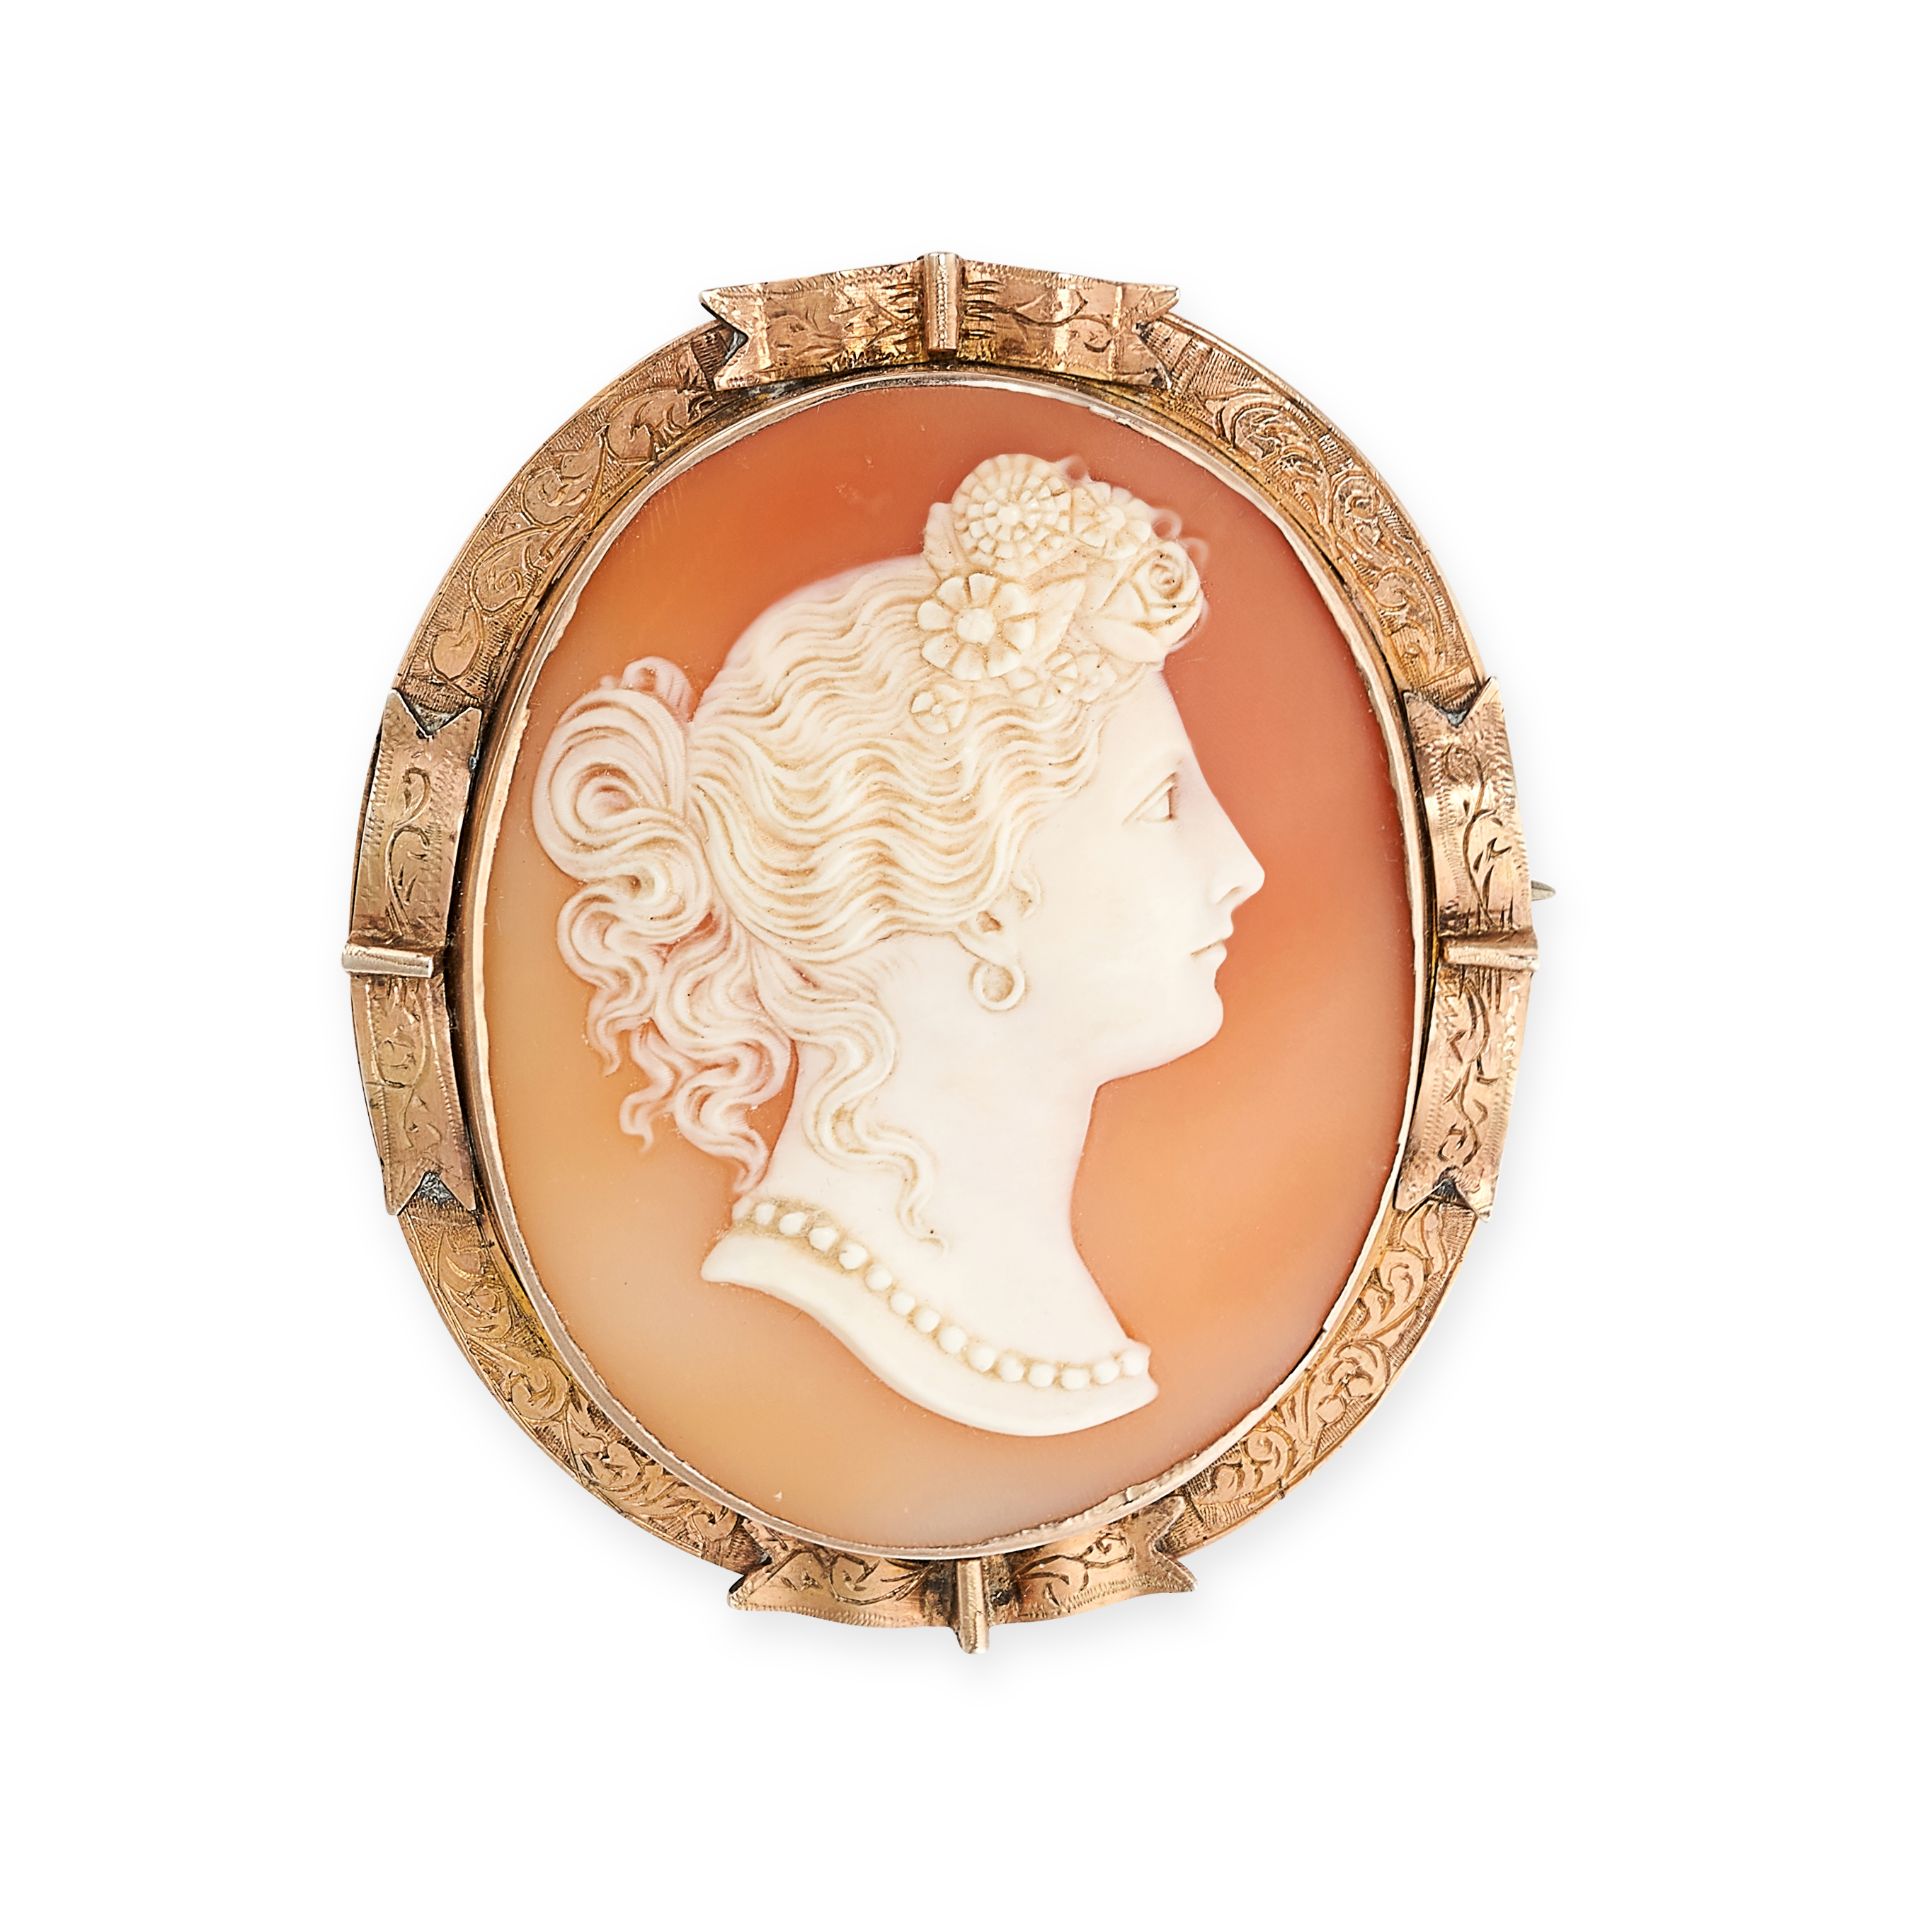 NO RESERVE - AN ANTIQUE SHELL CAMEO BROOCH, LATE 19TH CENTURY, depicting a lady in profile, with a